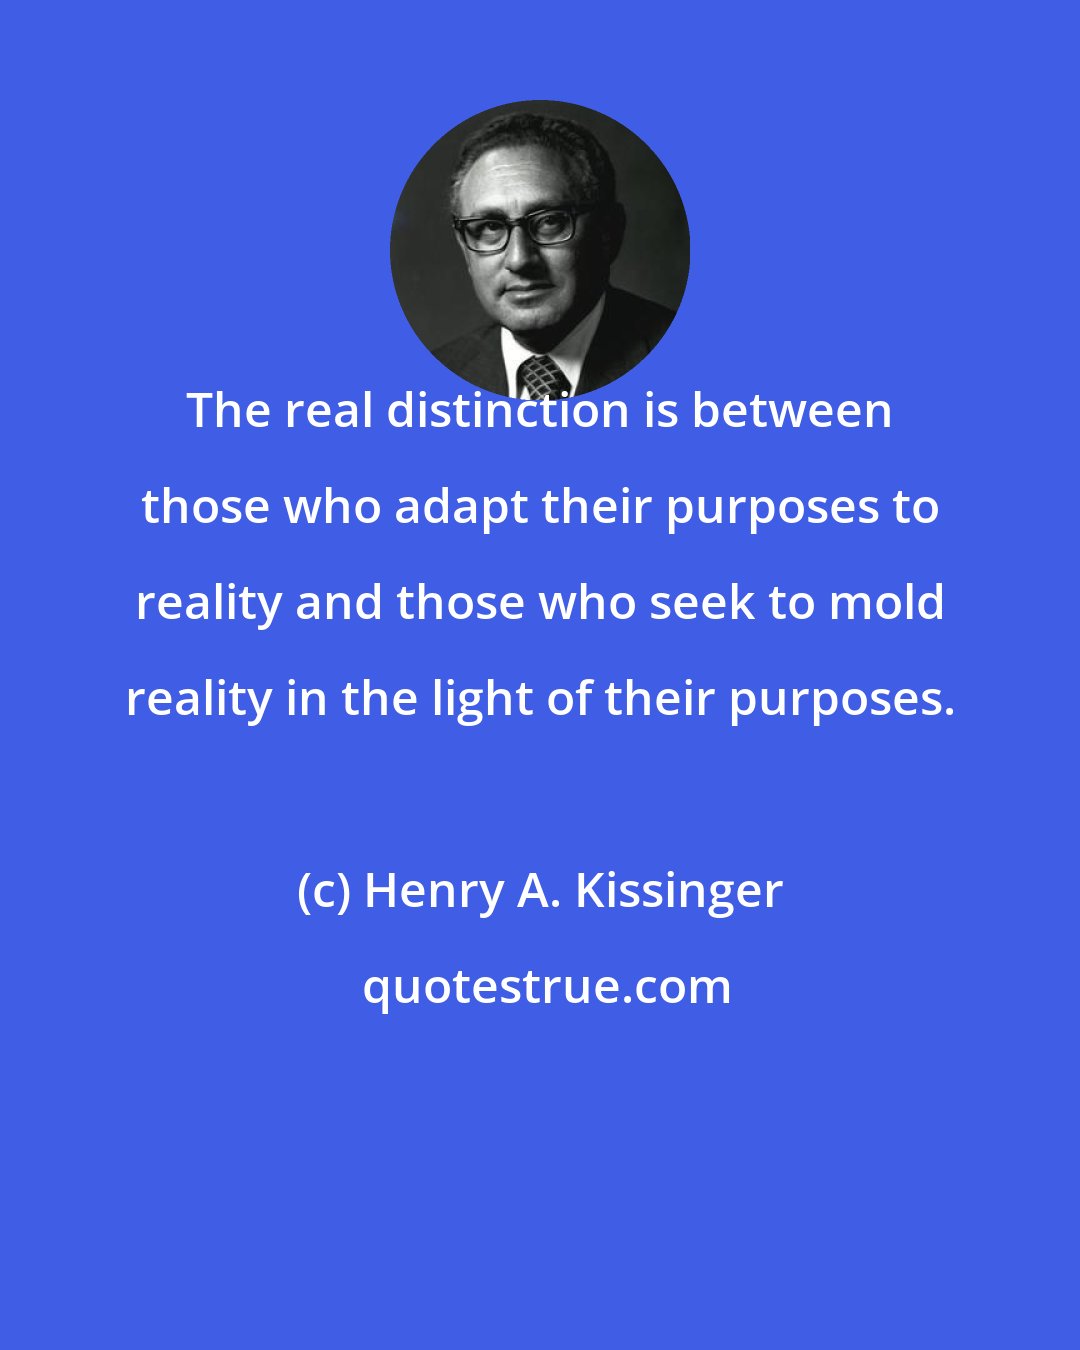 Henry A. Kissinger: The real distinction is between those who adapt their purposes to reality and those who seek to mold reality in the light of their purposes.